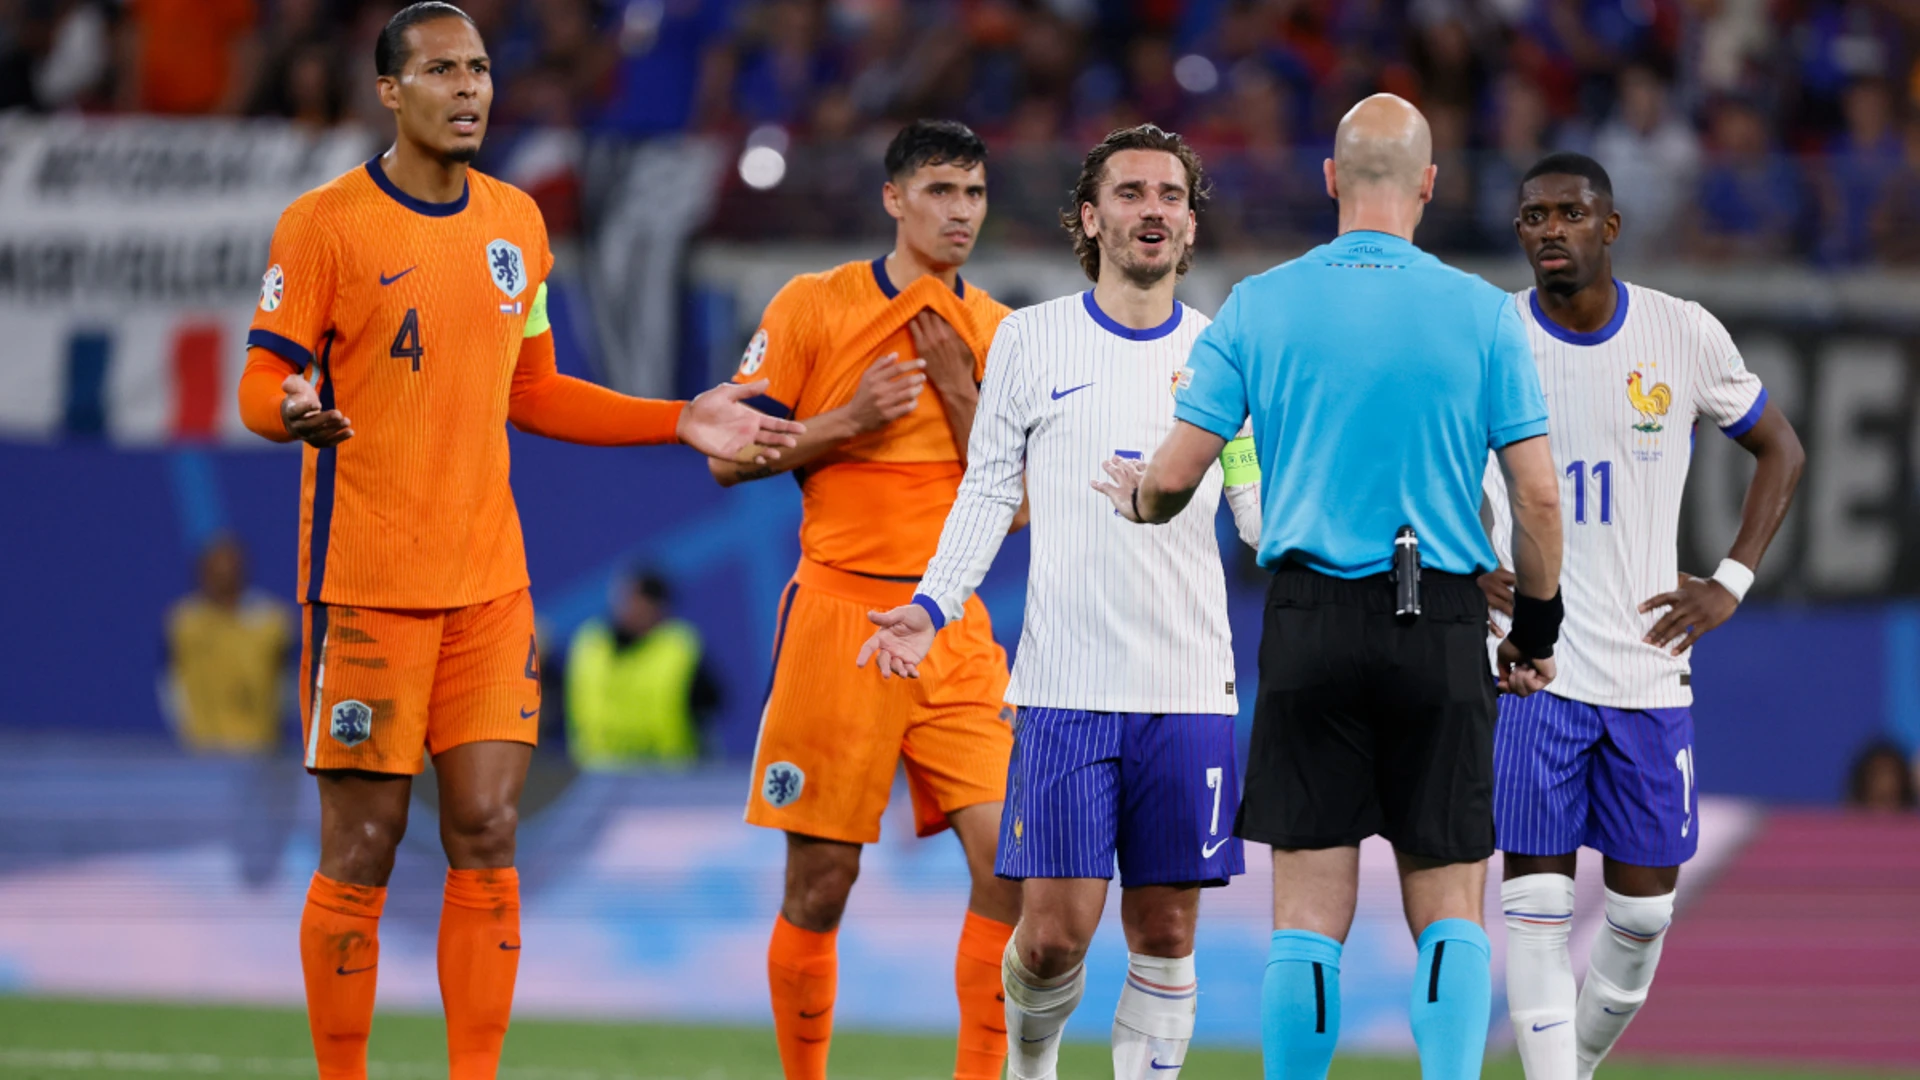 France and Netherlands scoreless draw leaves group wide open